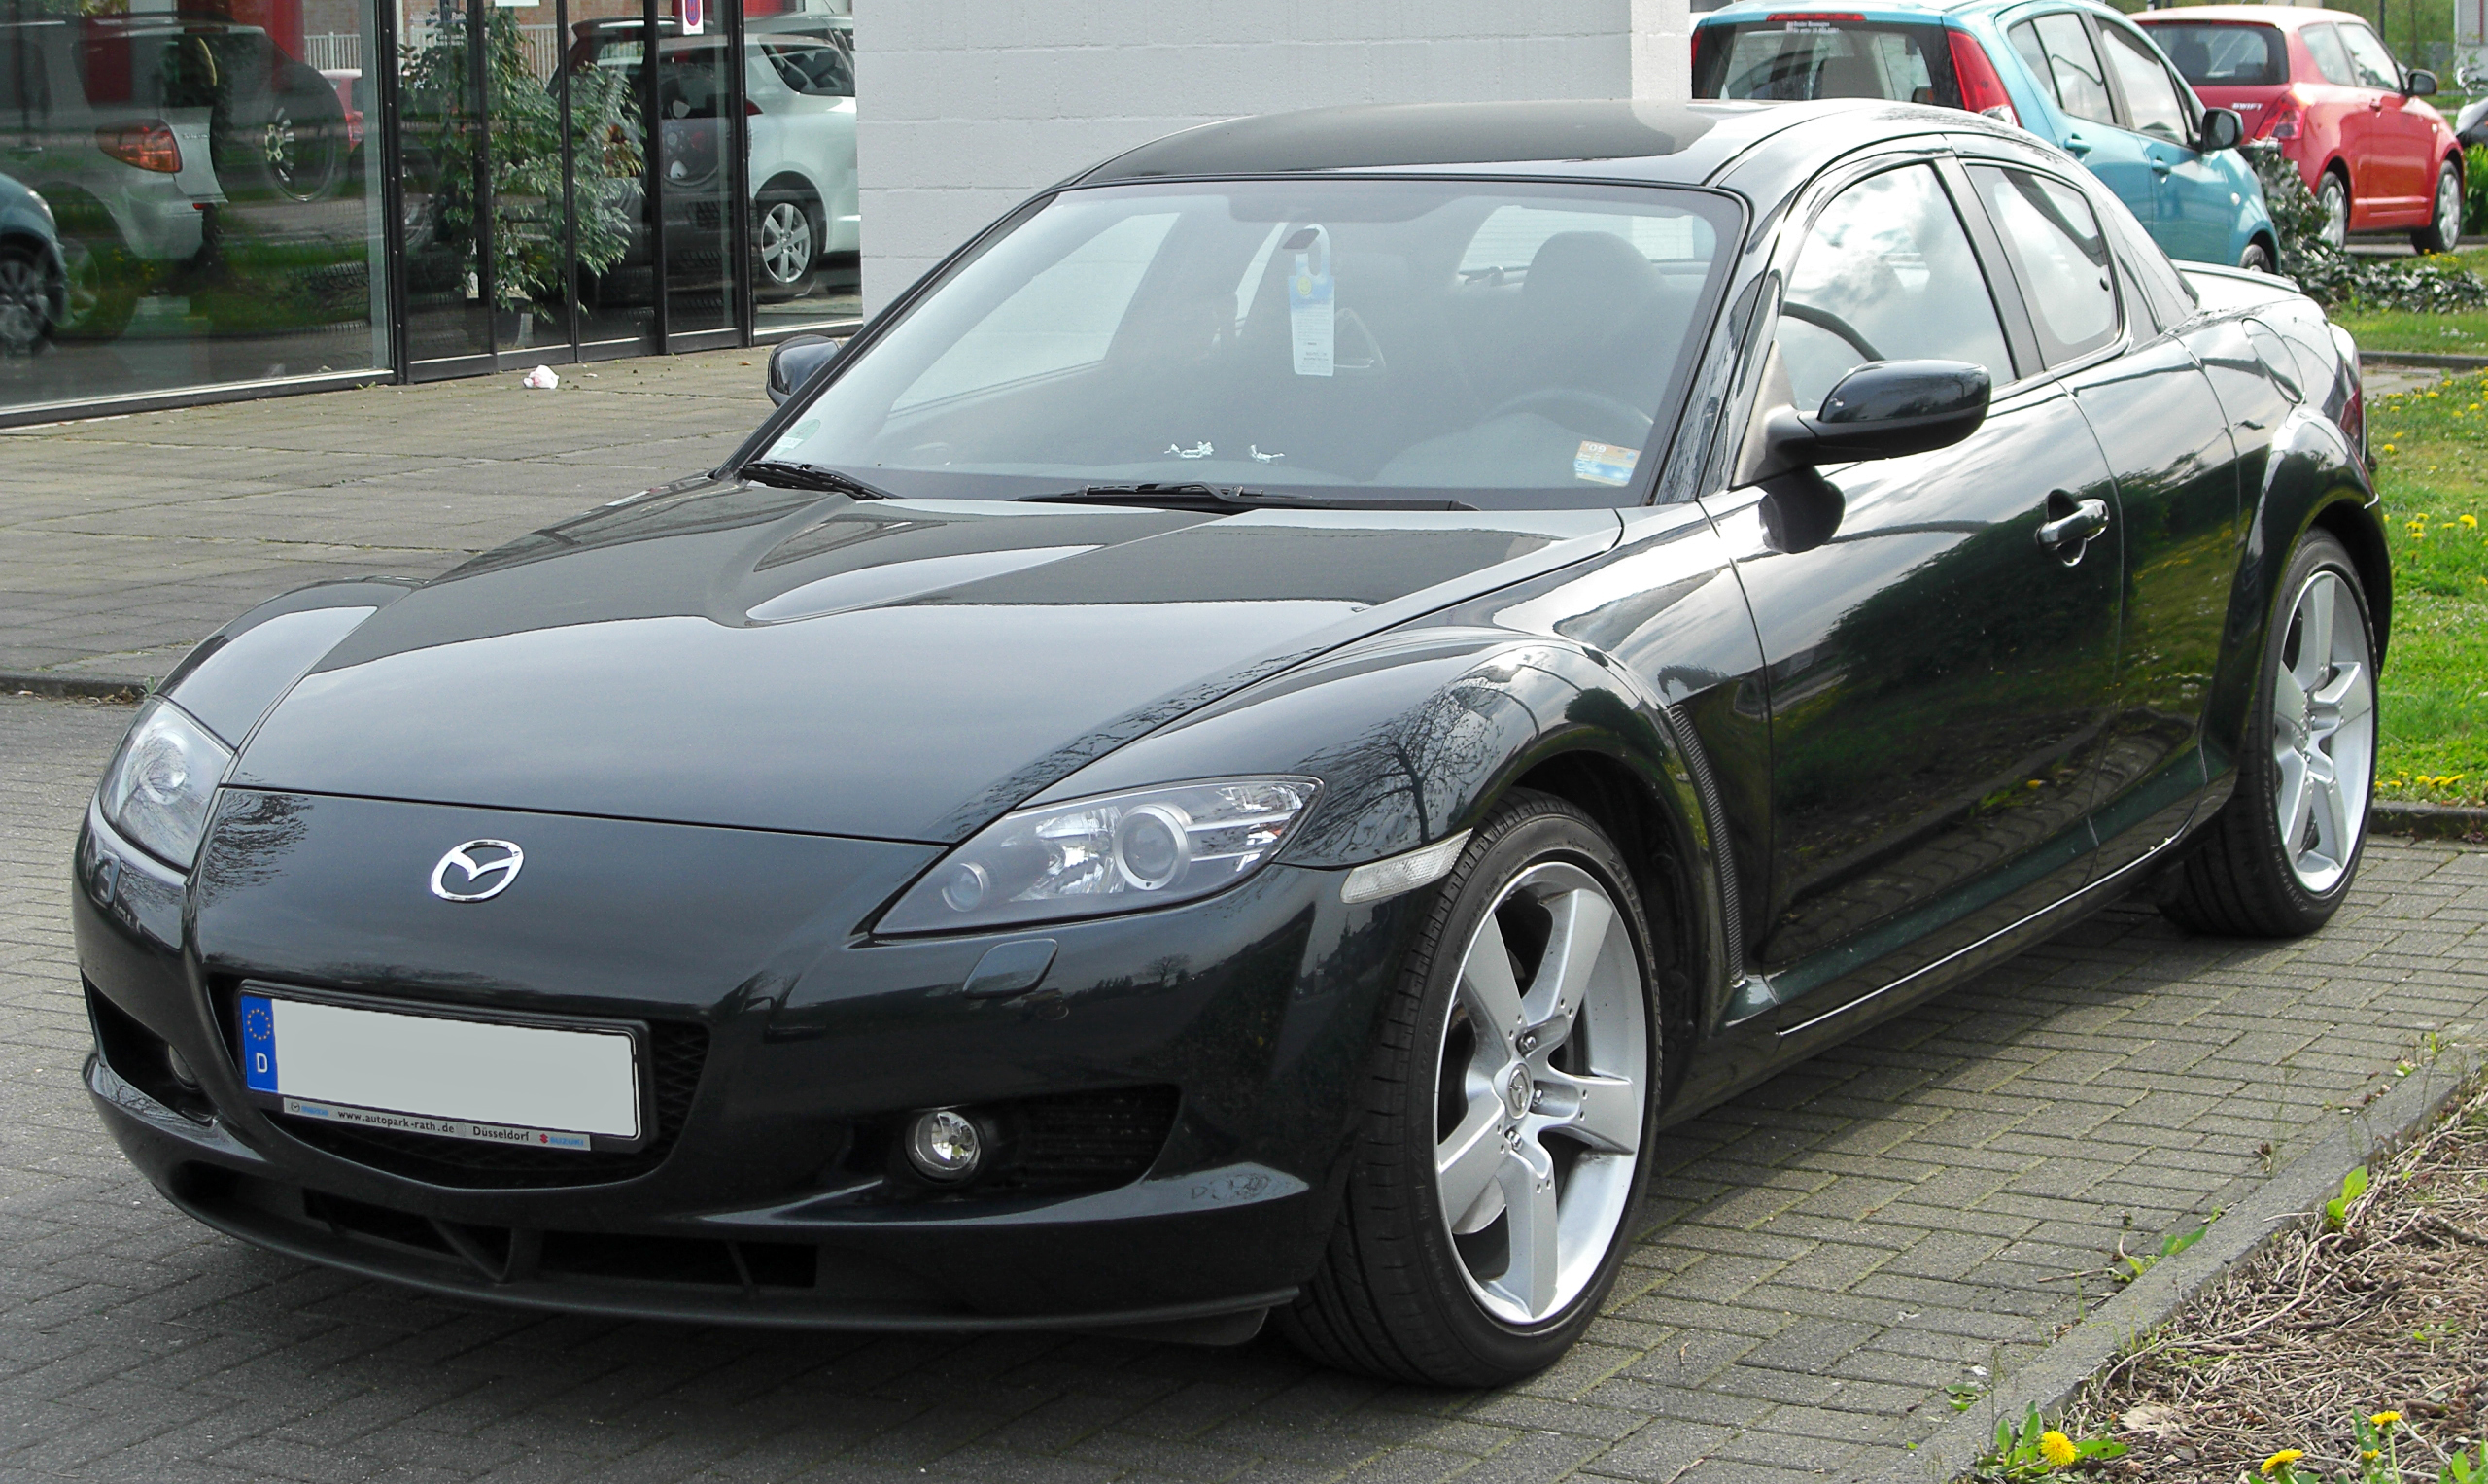 file-mazda-rx-8-front-1-20100425-jpg-wikimedia-commons